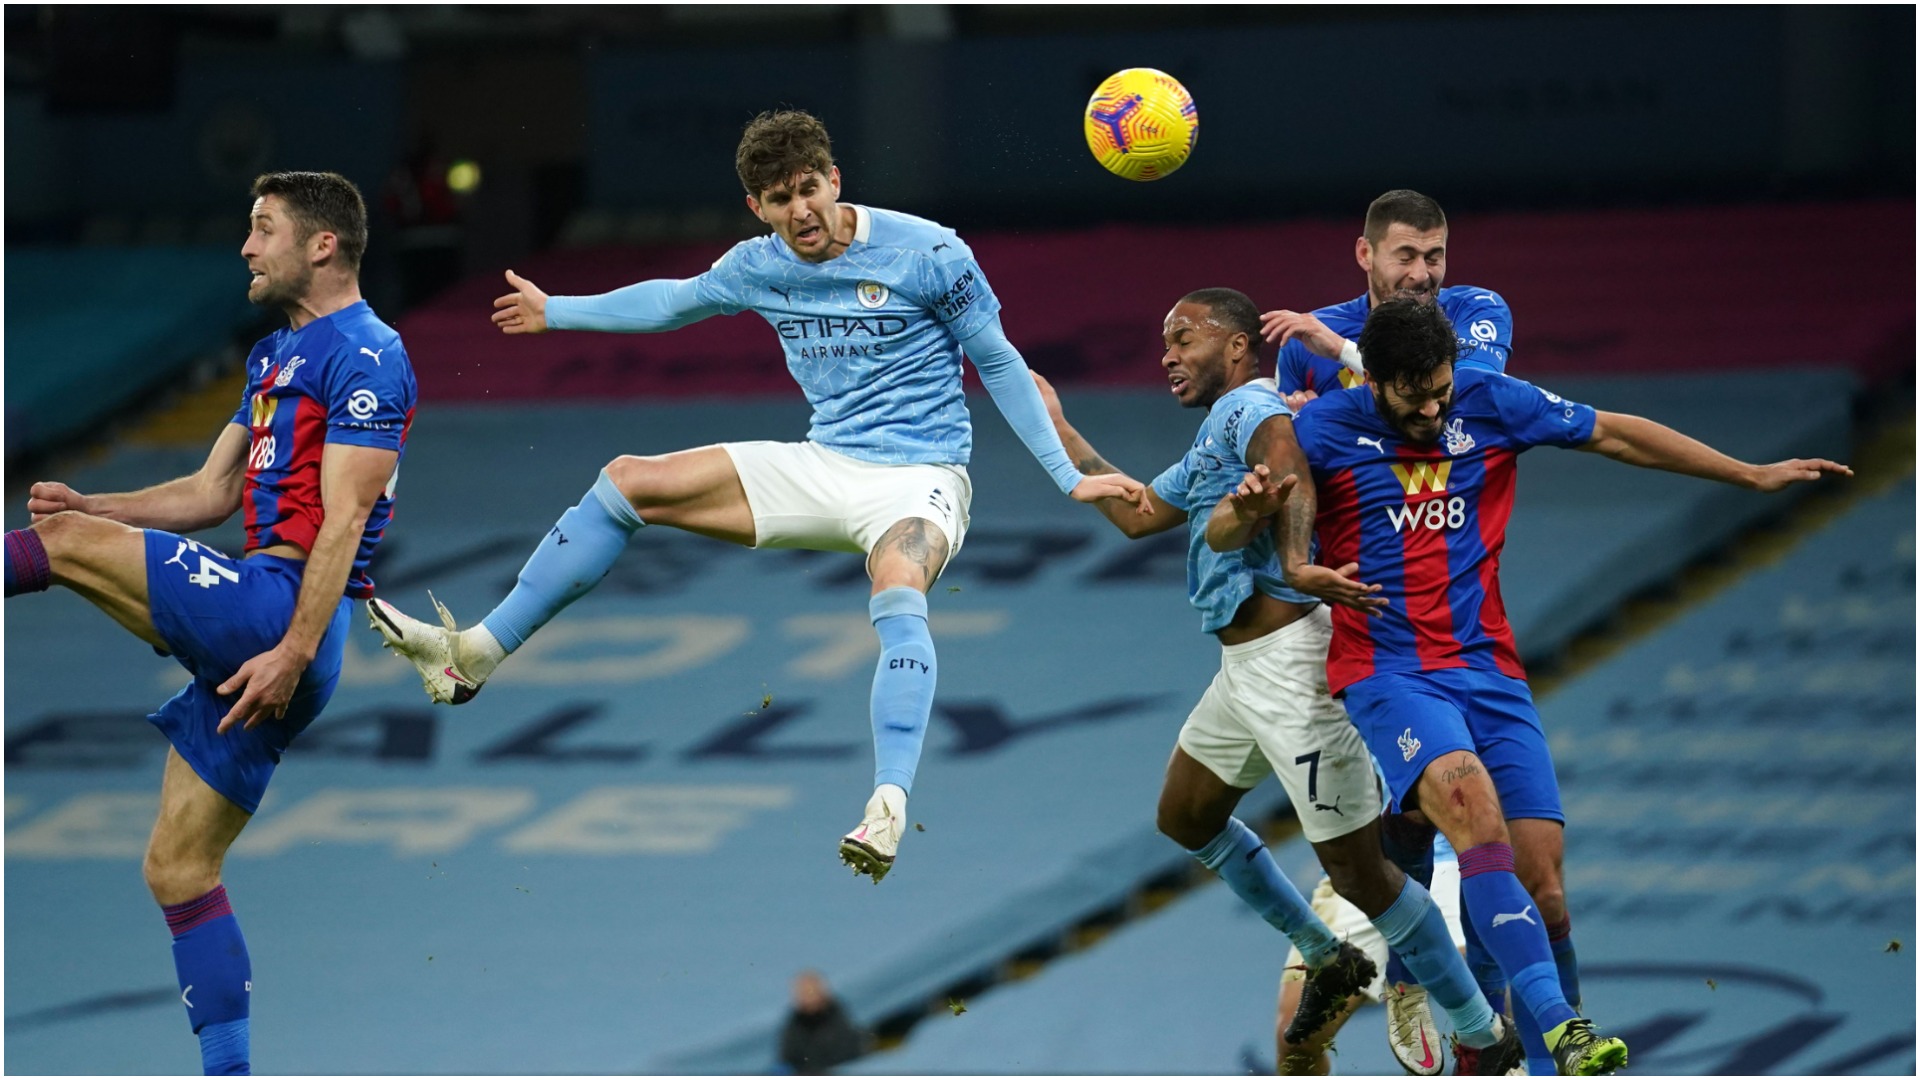 Manchester City 4 - 0 Crystal Palace